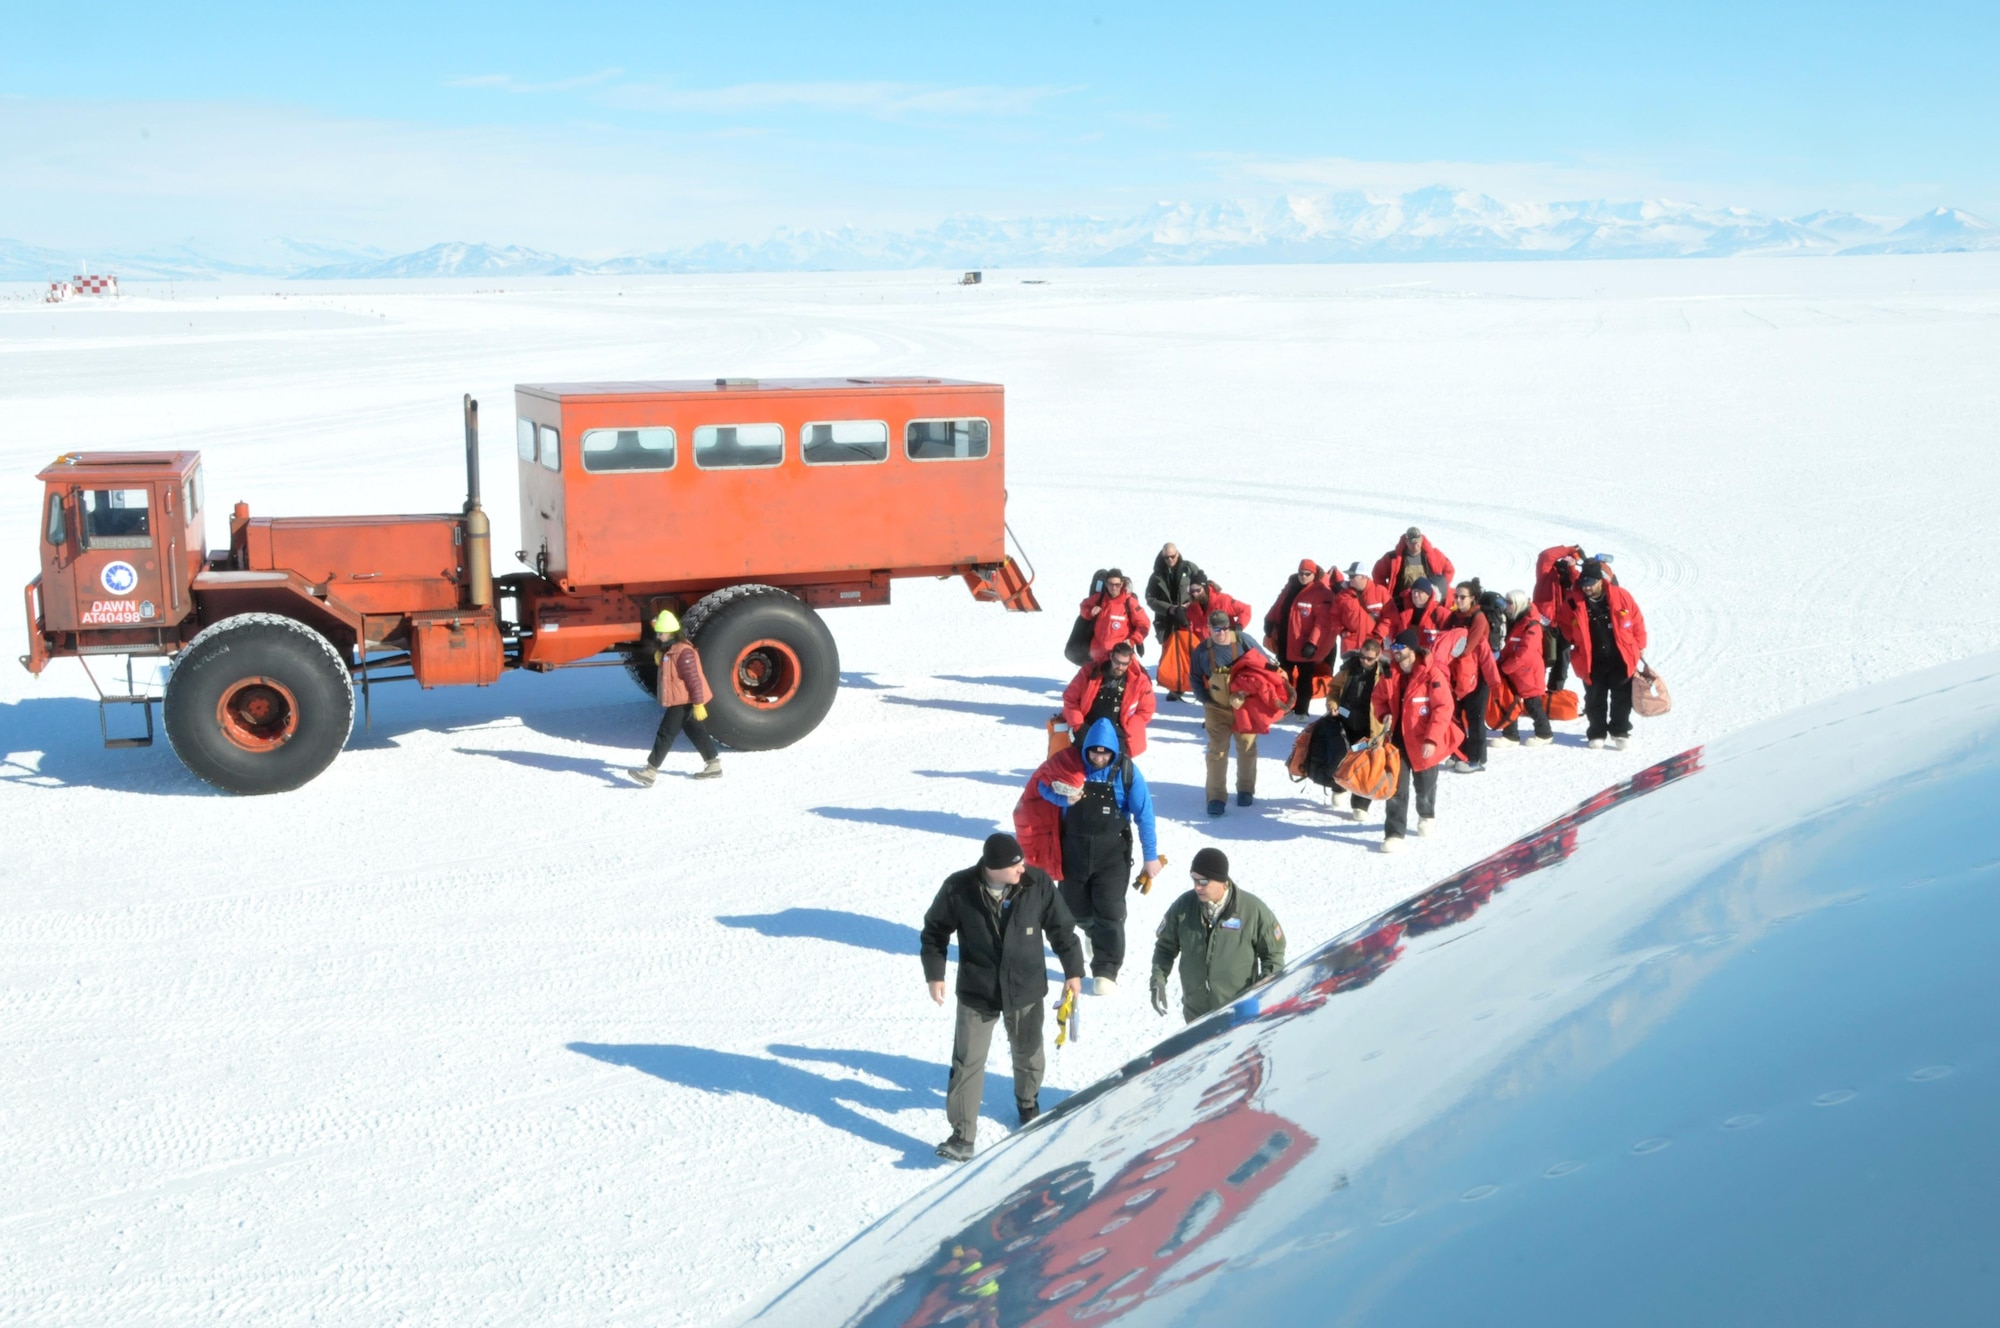 New York National Guard Aircrew completes South Pole mission despite extreme weather conditions